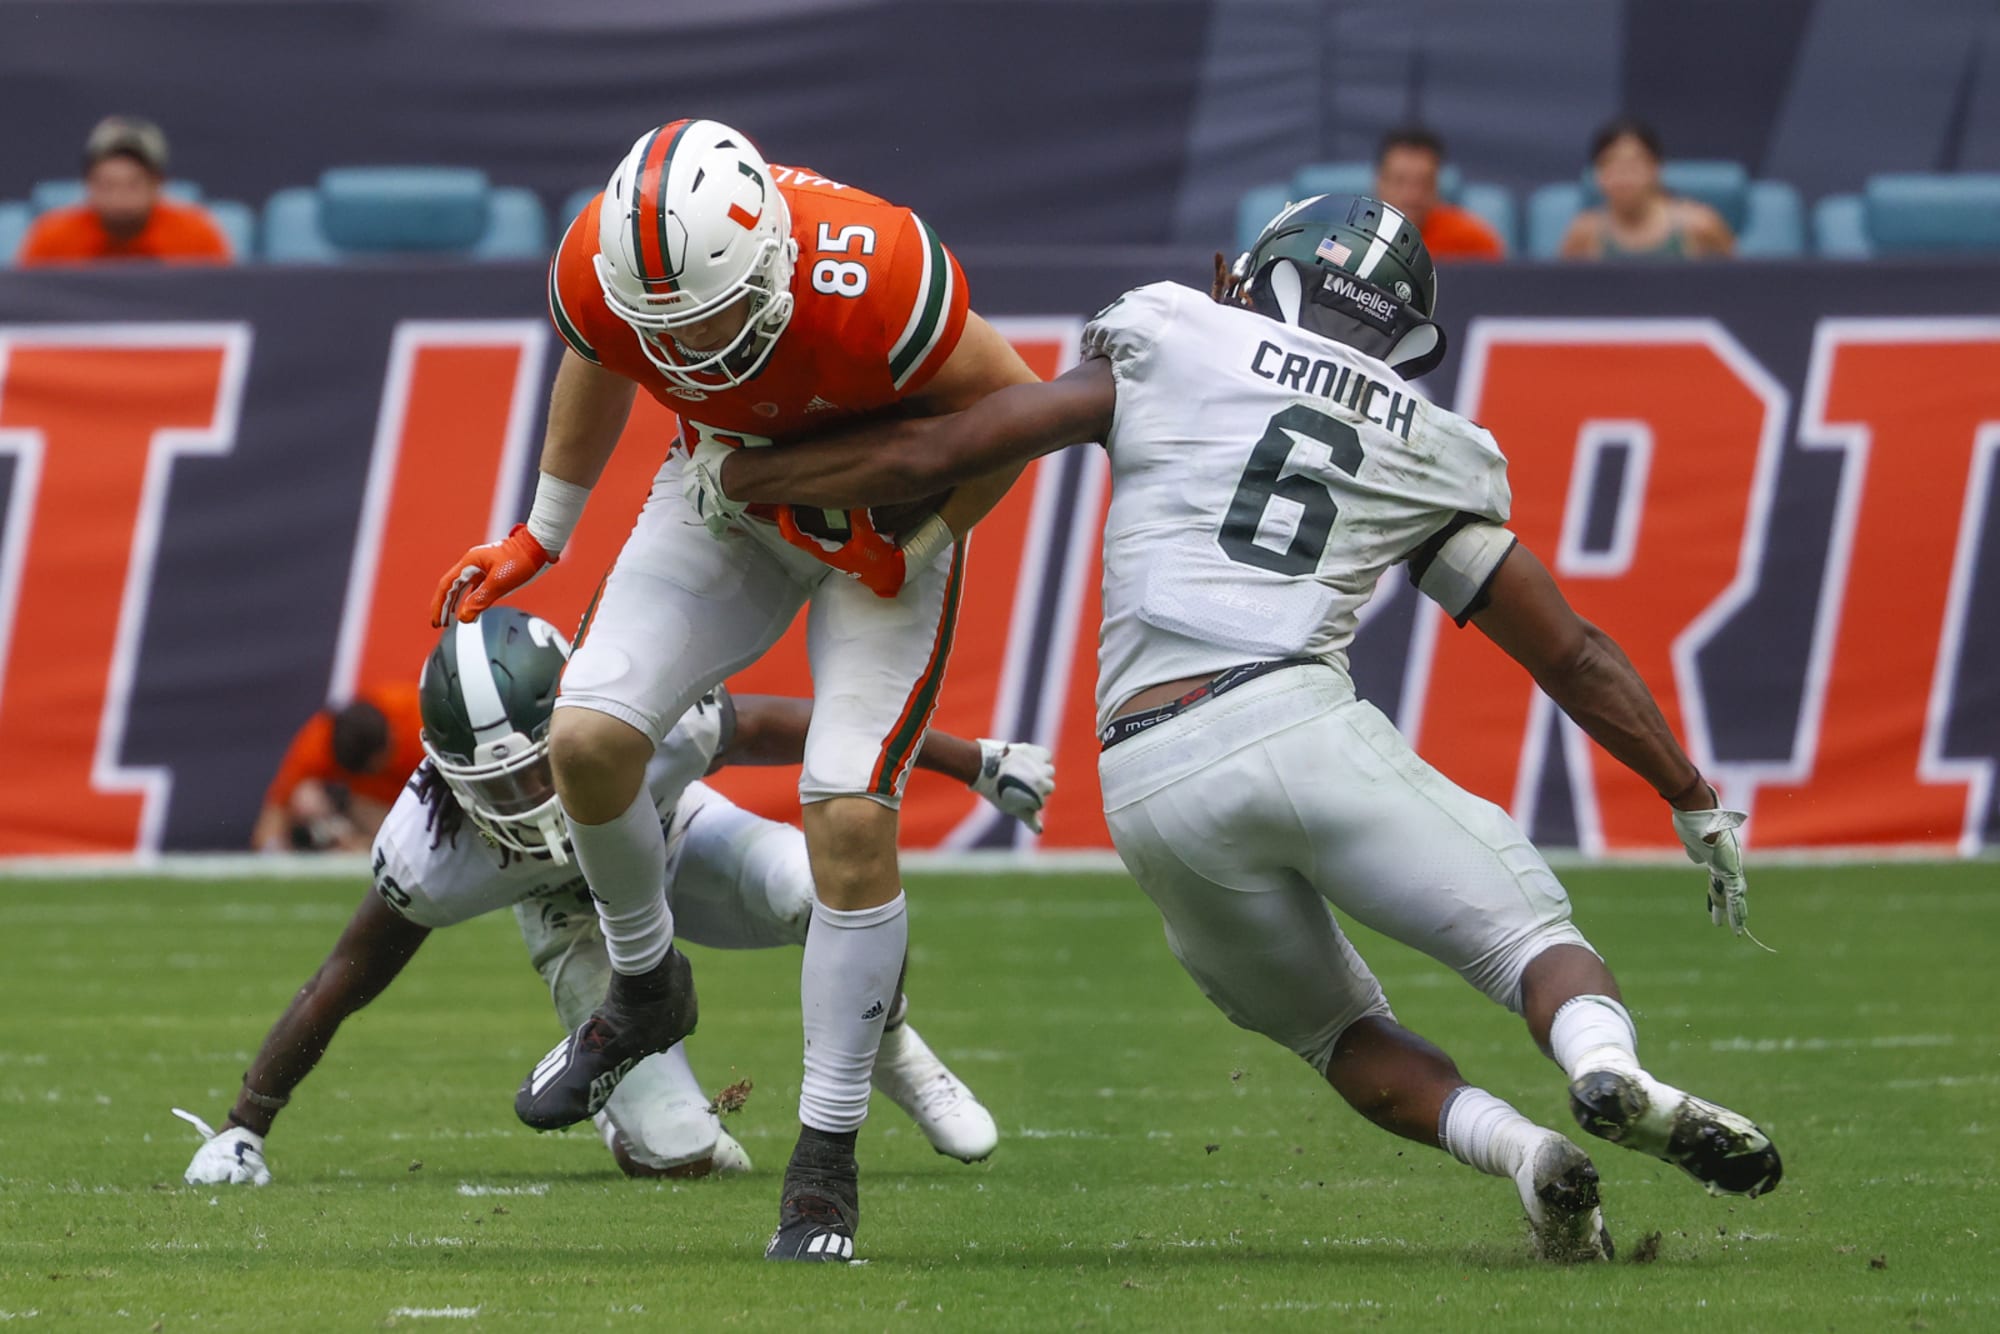 Miami Hurricanes TE Will Mallory’s seasonal stats are as expected per